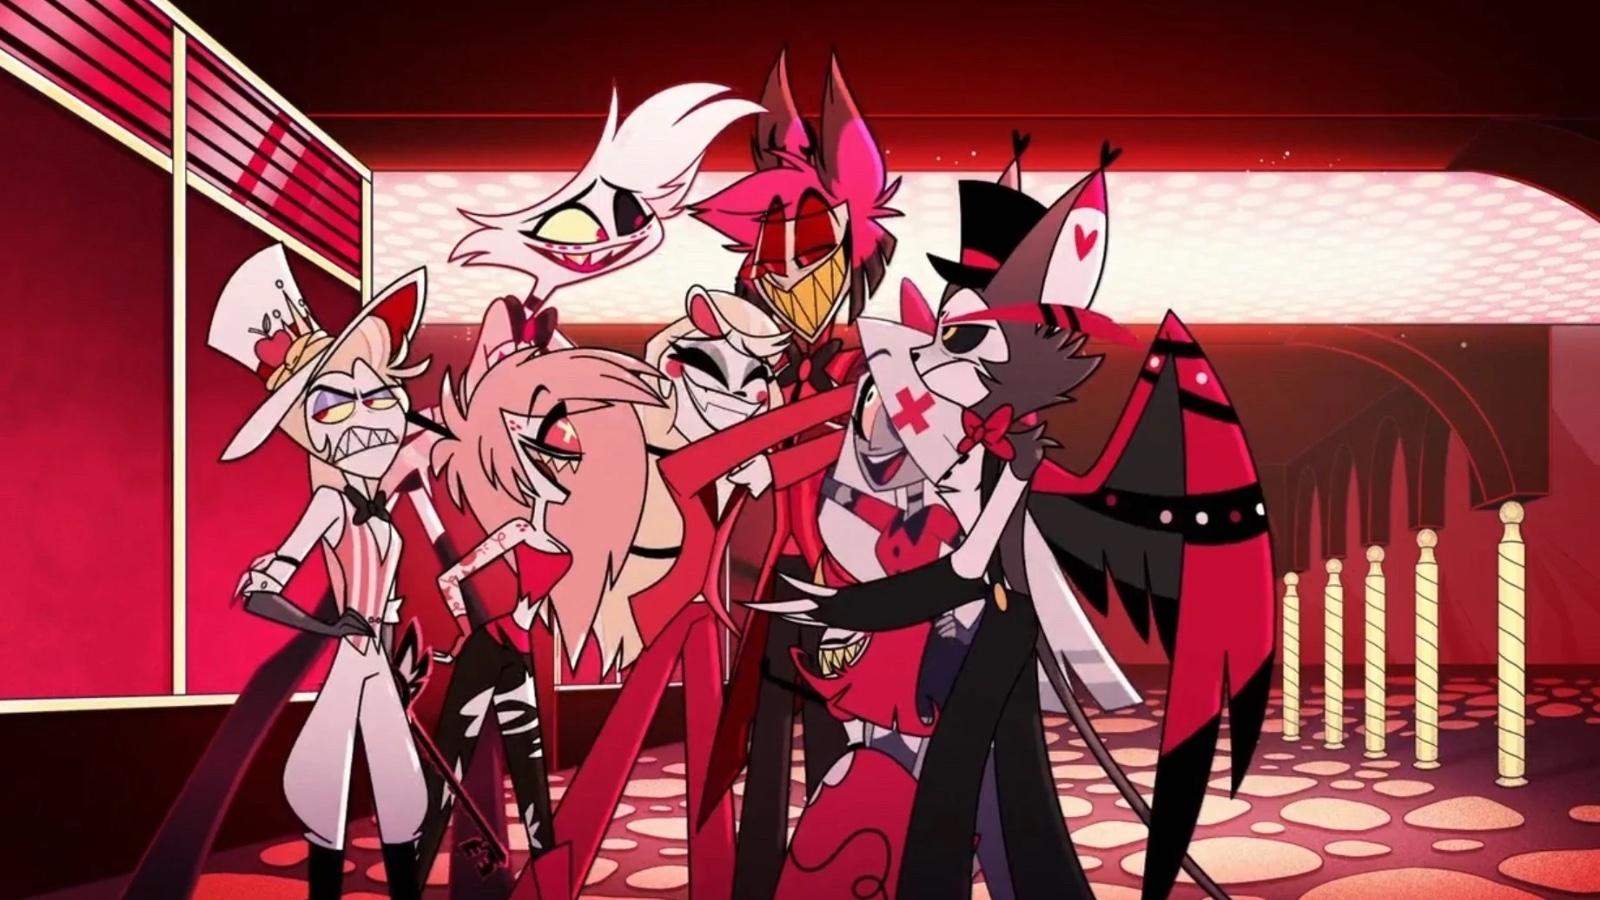 Hazbin Hotel Season 1 finale with Charlie and Lucifer.